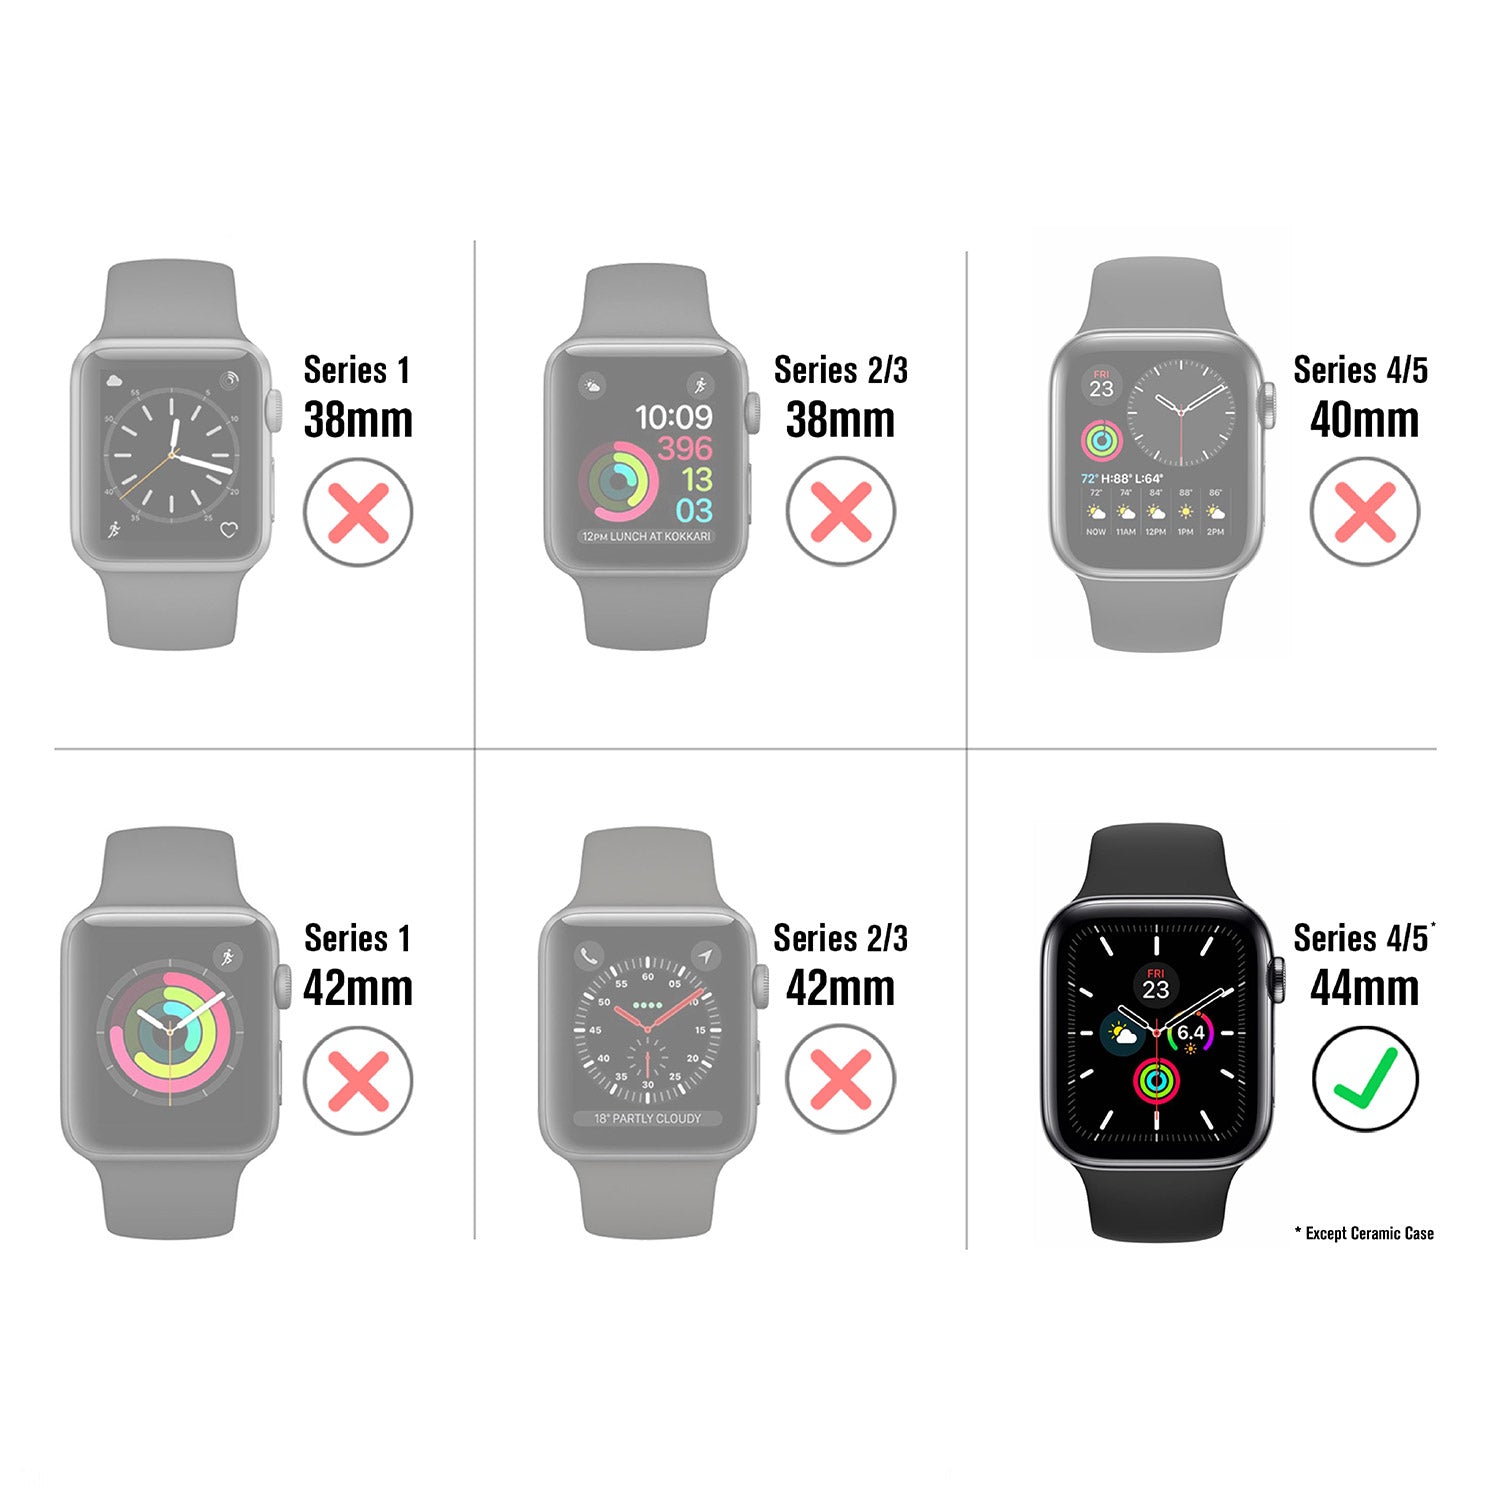 catalyst apple watch series 6 5 4 se gen 21 44mm 40mm impact protection case sport band different sizes of apple watch text reads series 1 38mm series 2/3 38mm series 4/5 40mm series 1 42mm series 2/3 42mm series 4/5 44mm except ceramic case